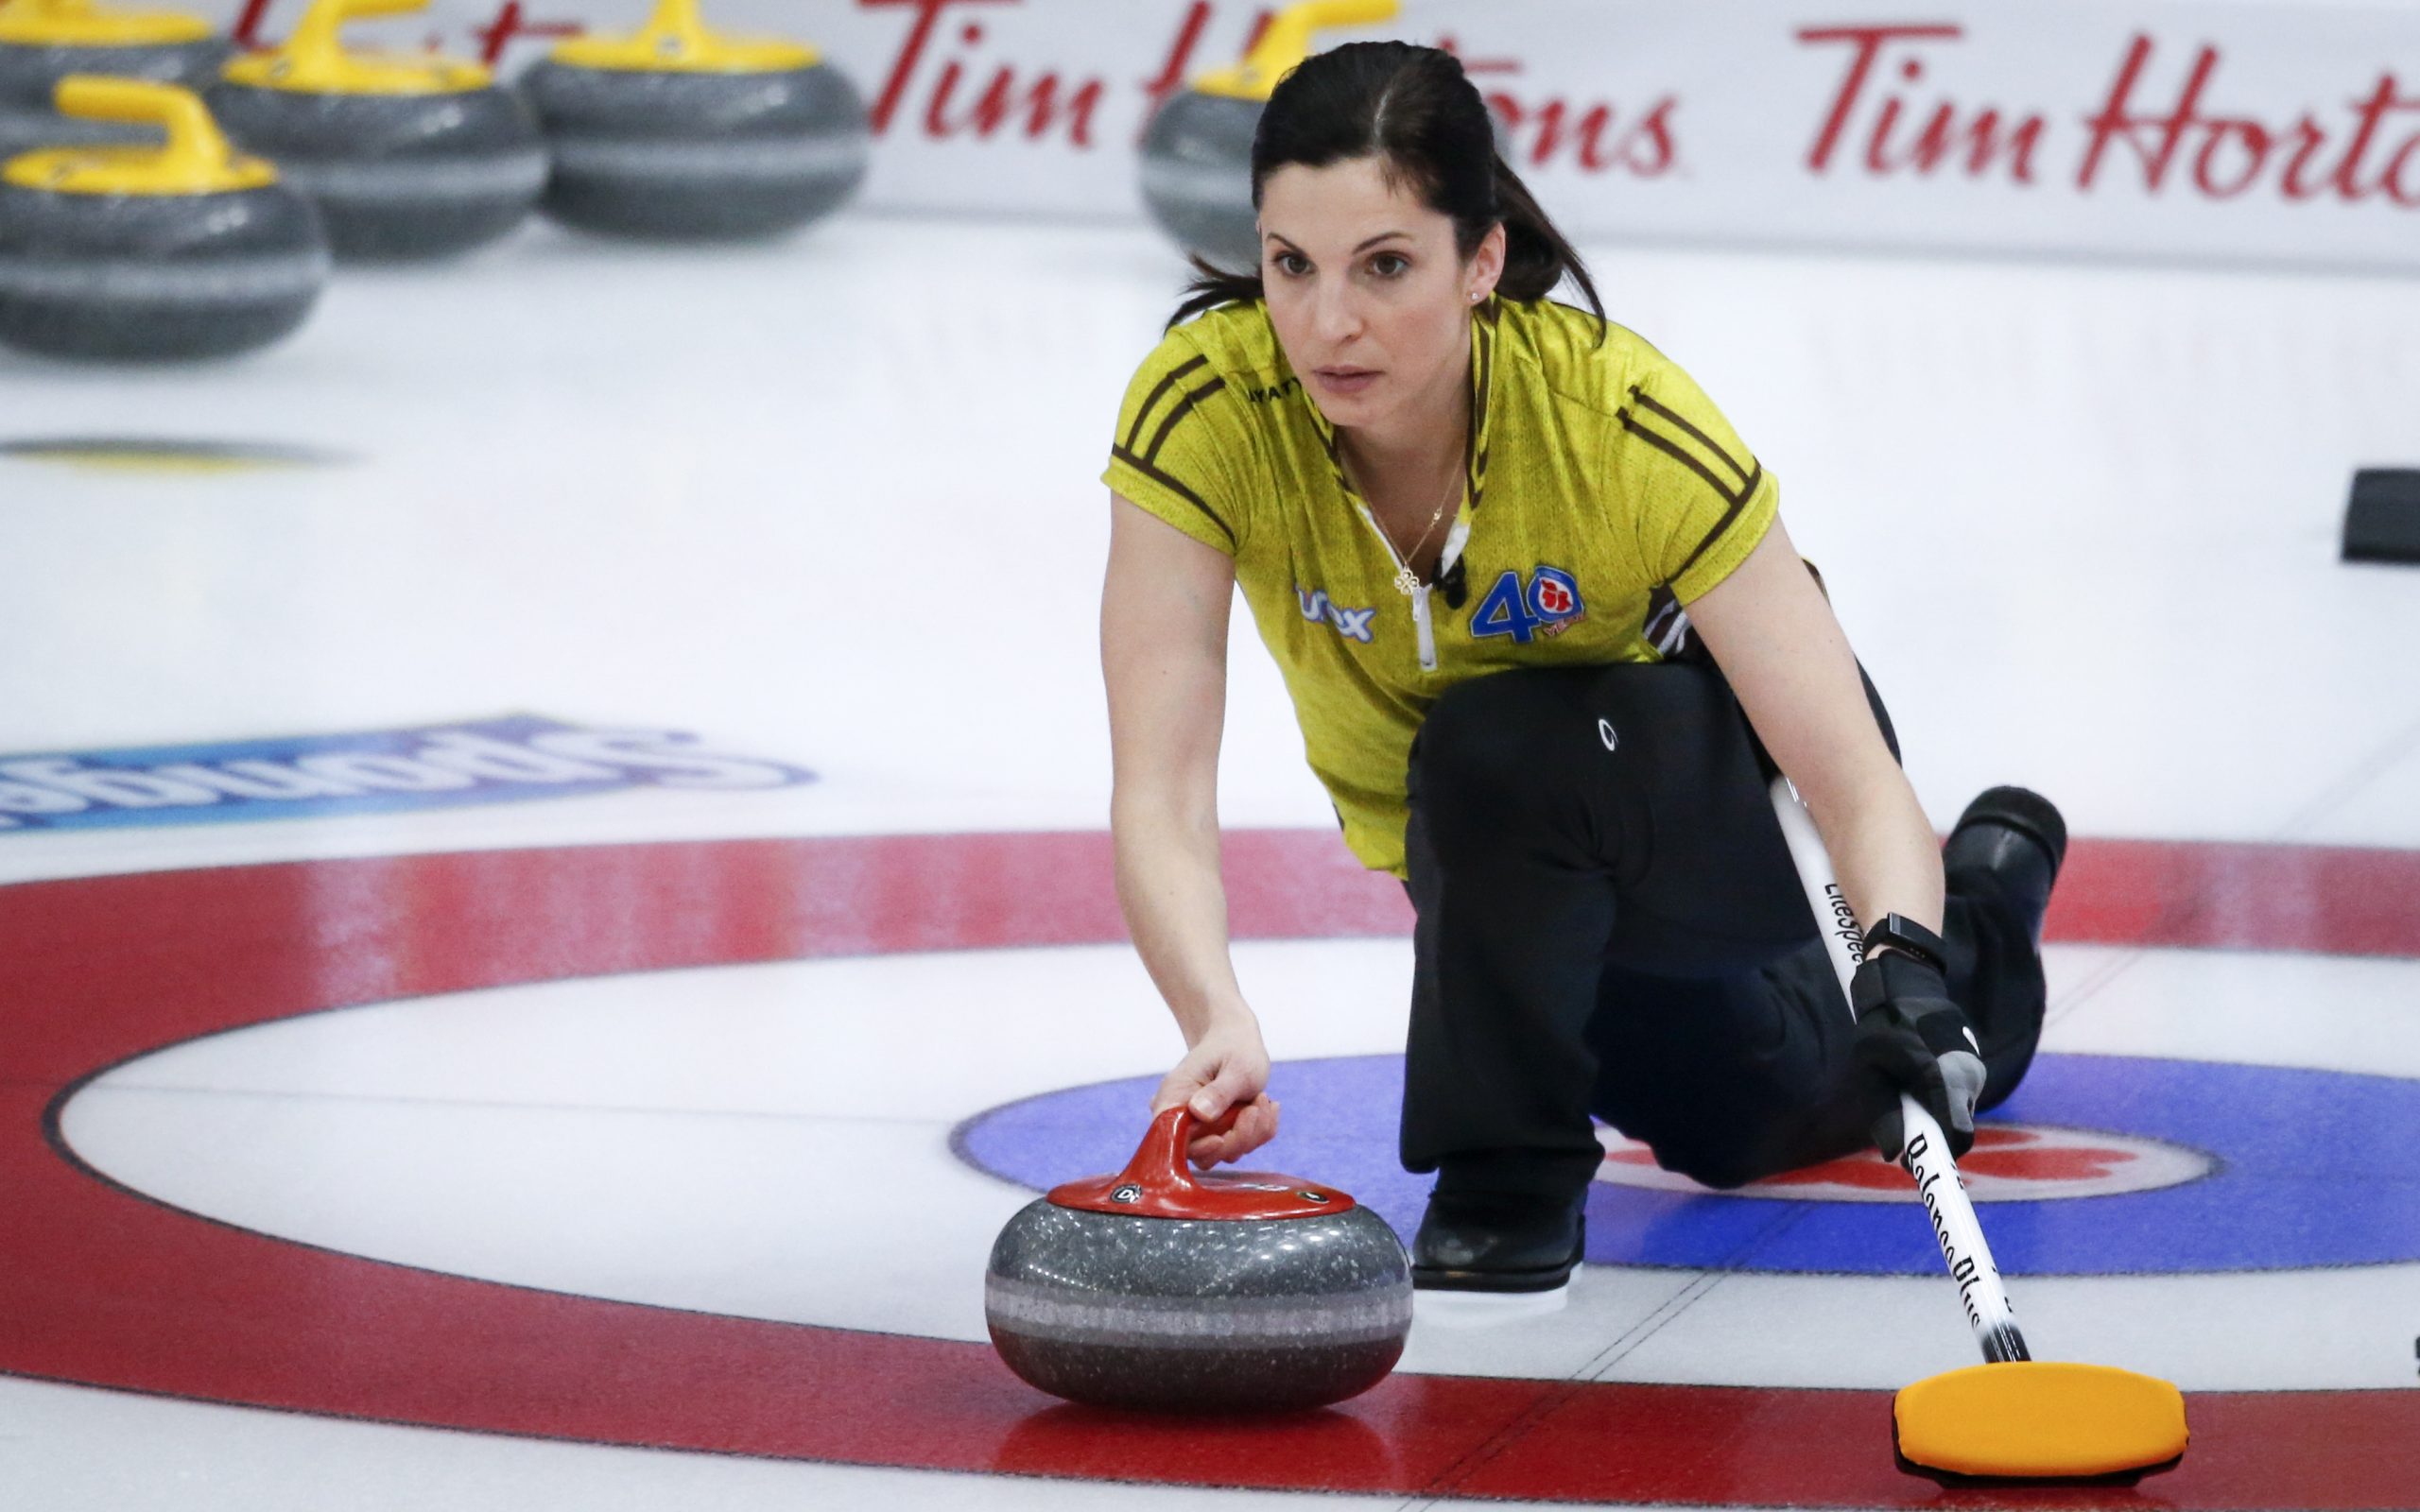 Three-time national champ and Olympian Lisa Weagle to focus on mixed doubles